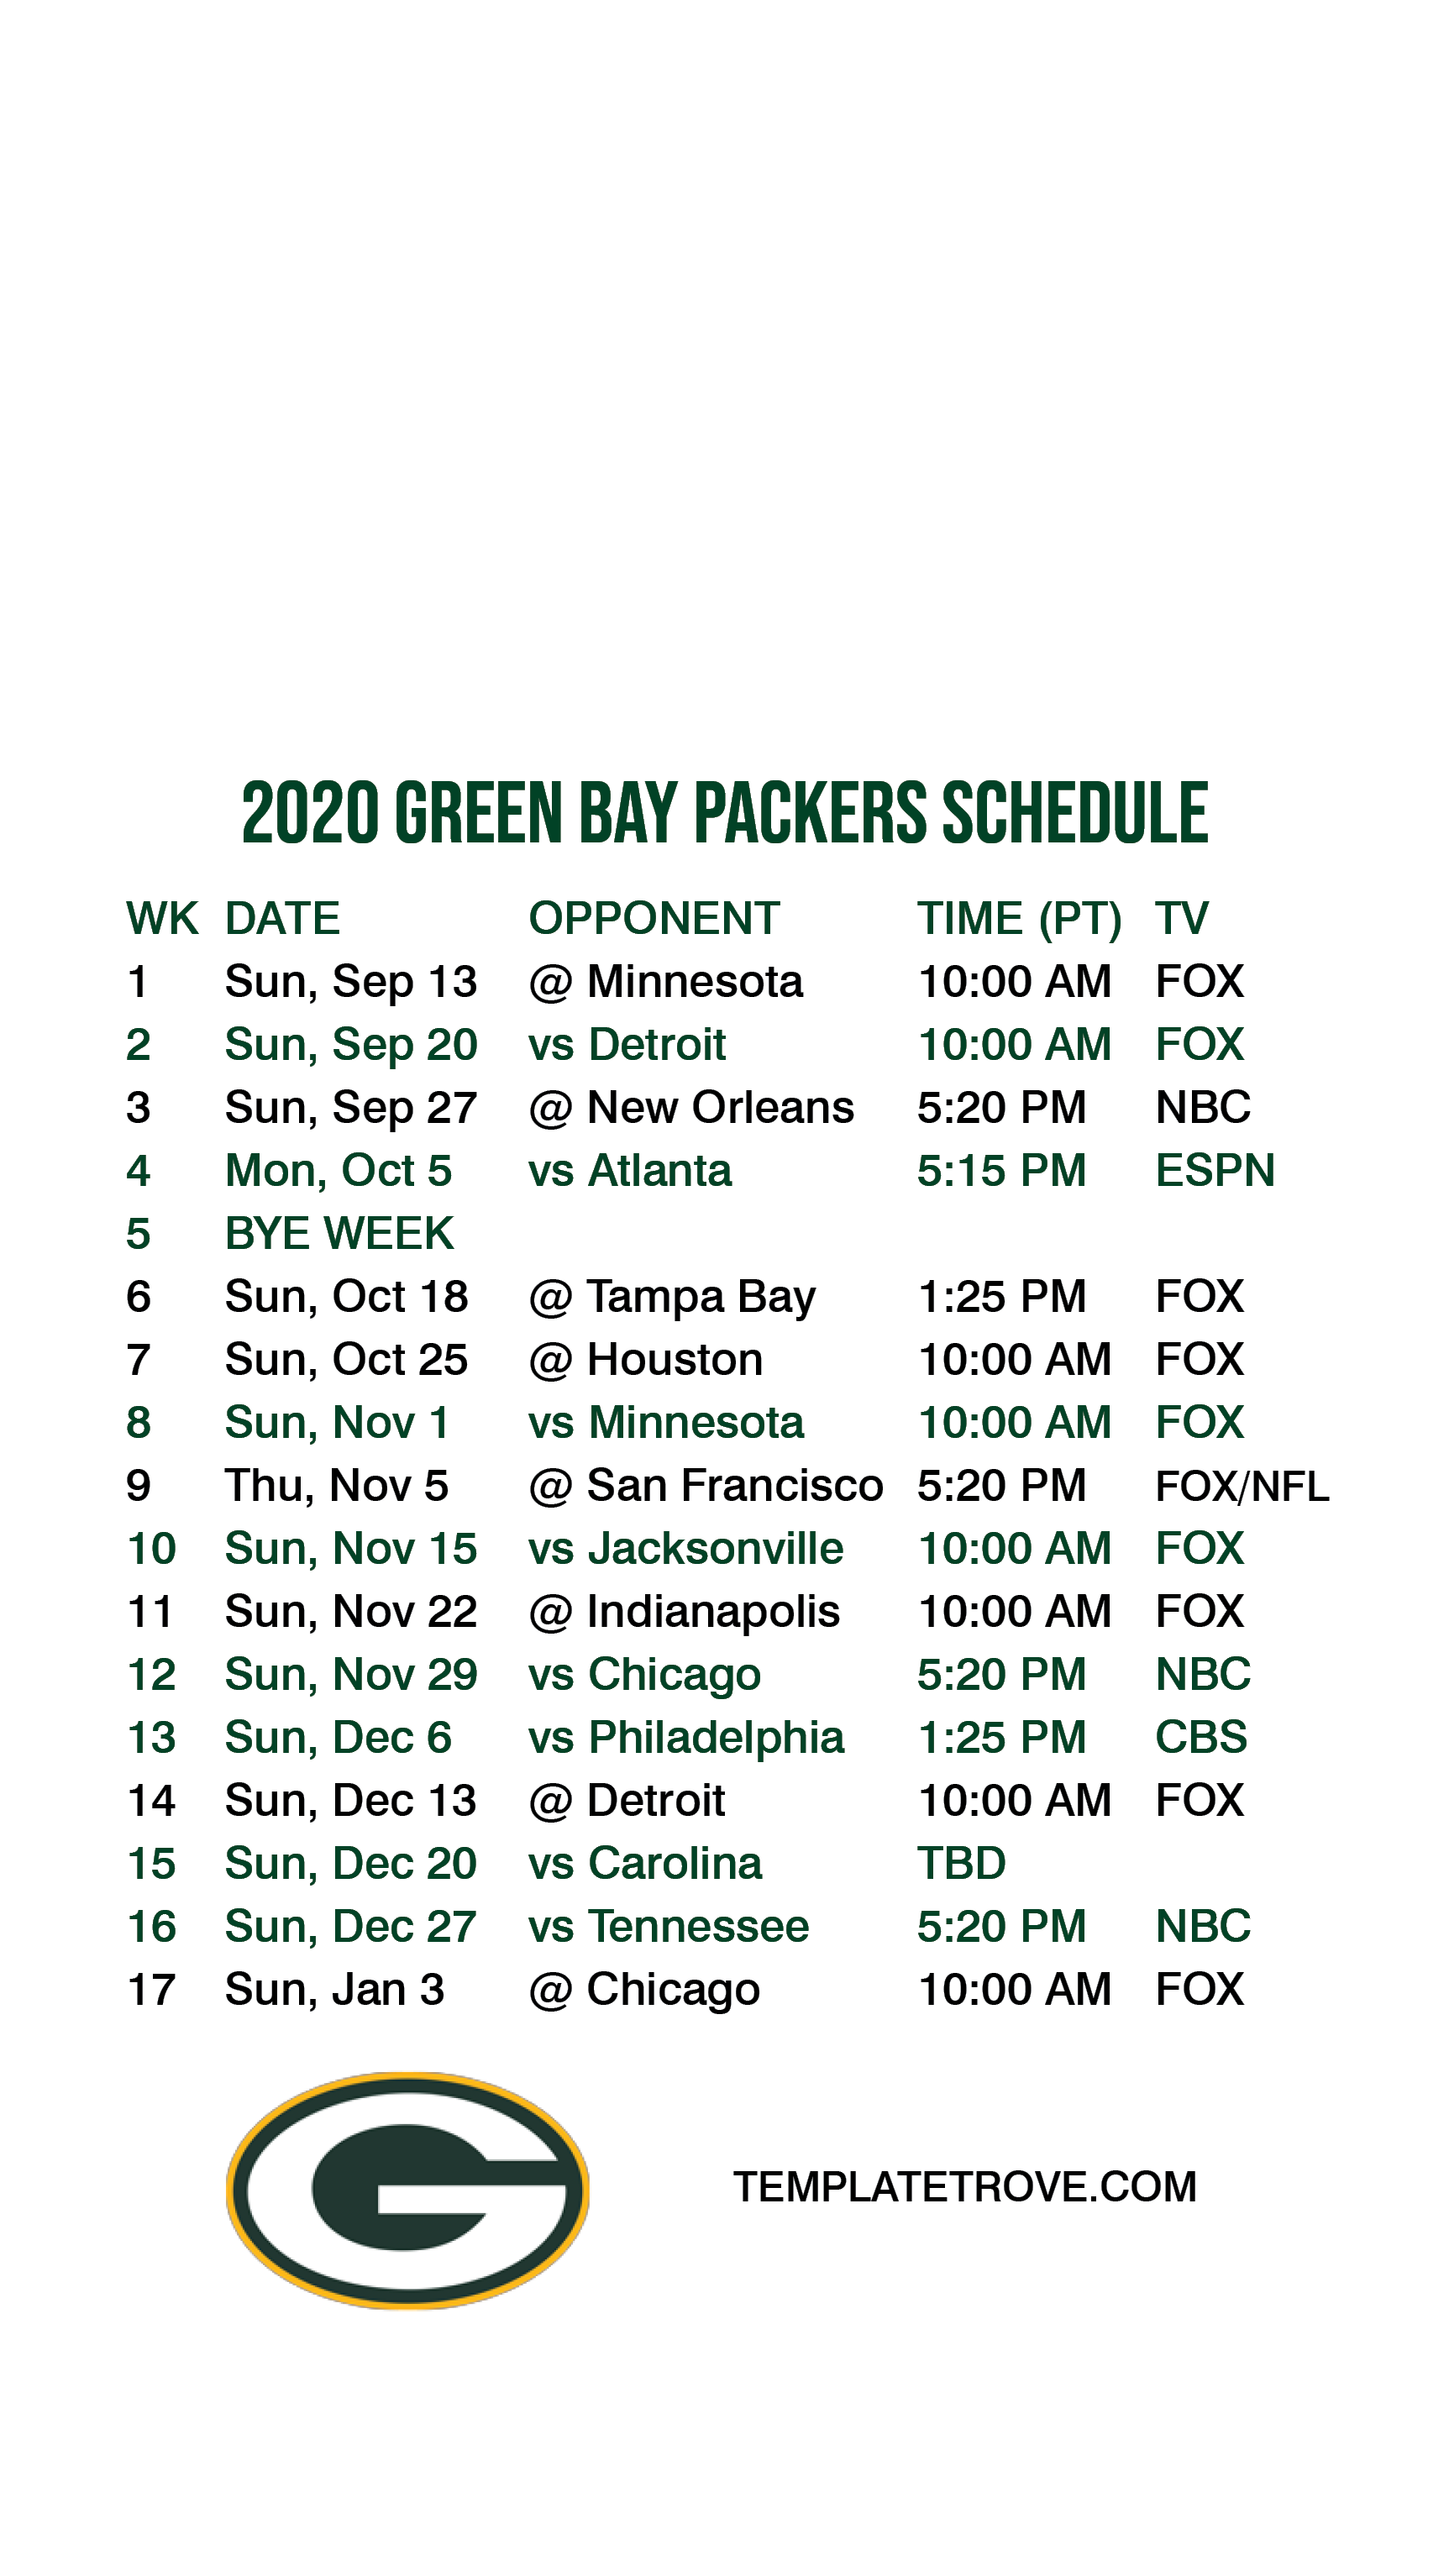 2020 2021 Green Bay Packers Lock Screen Schedule For Iphone 6 7 8 Plus